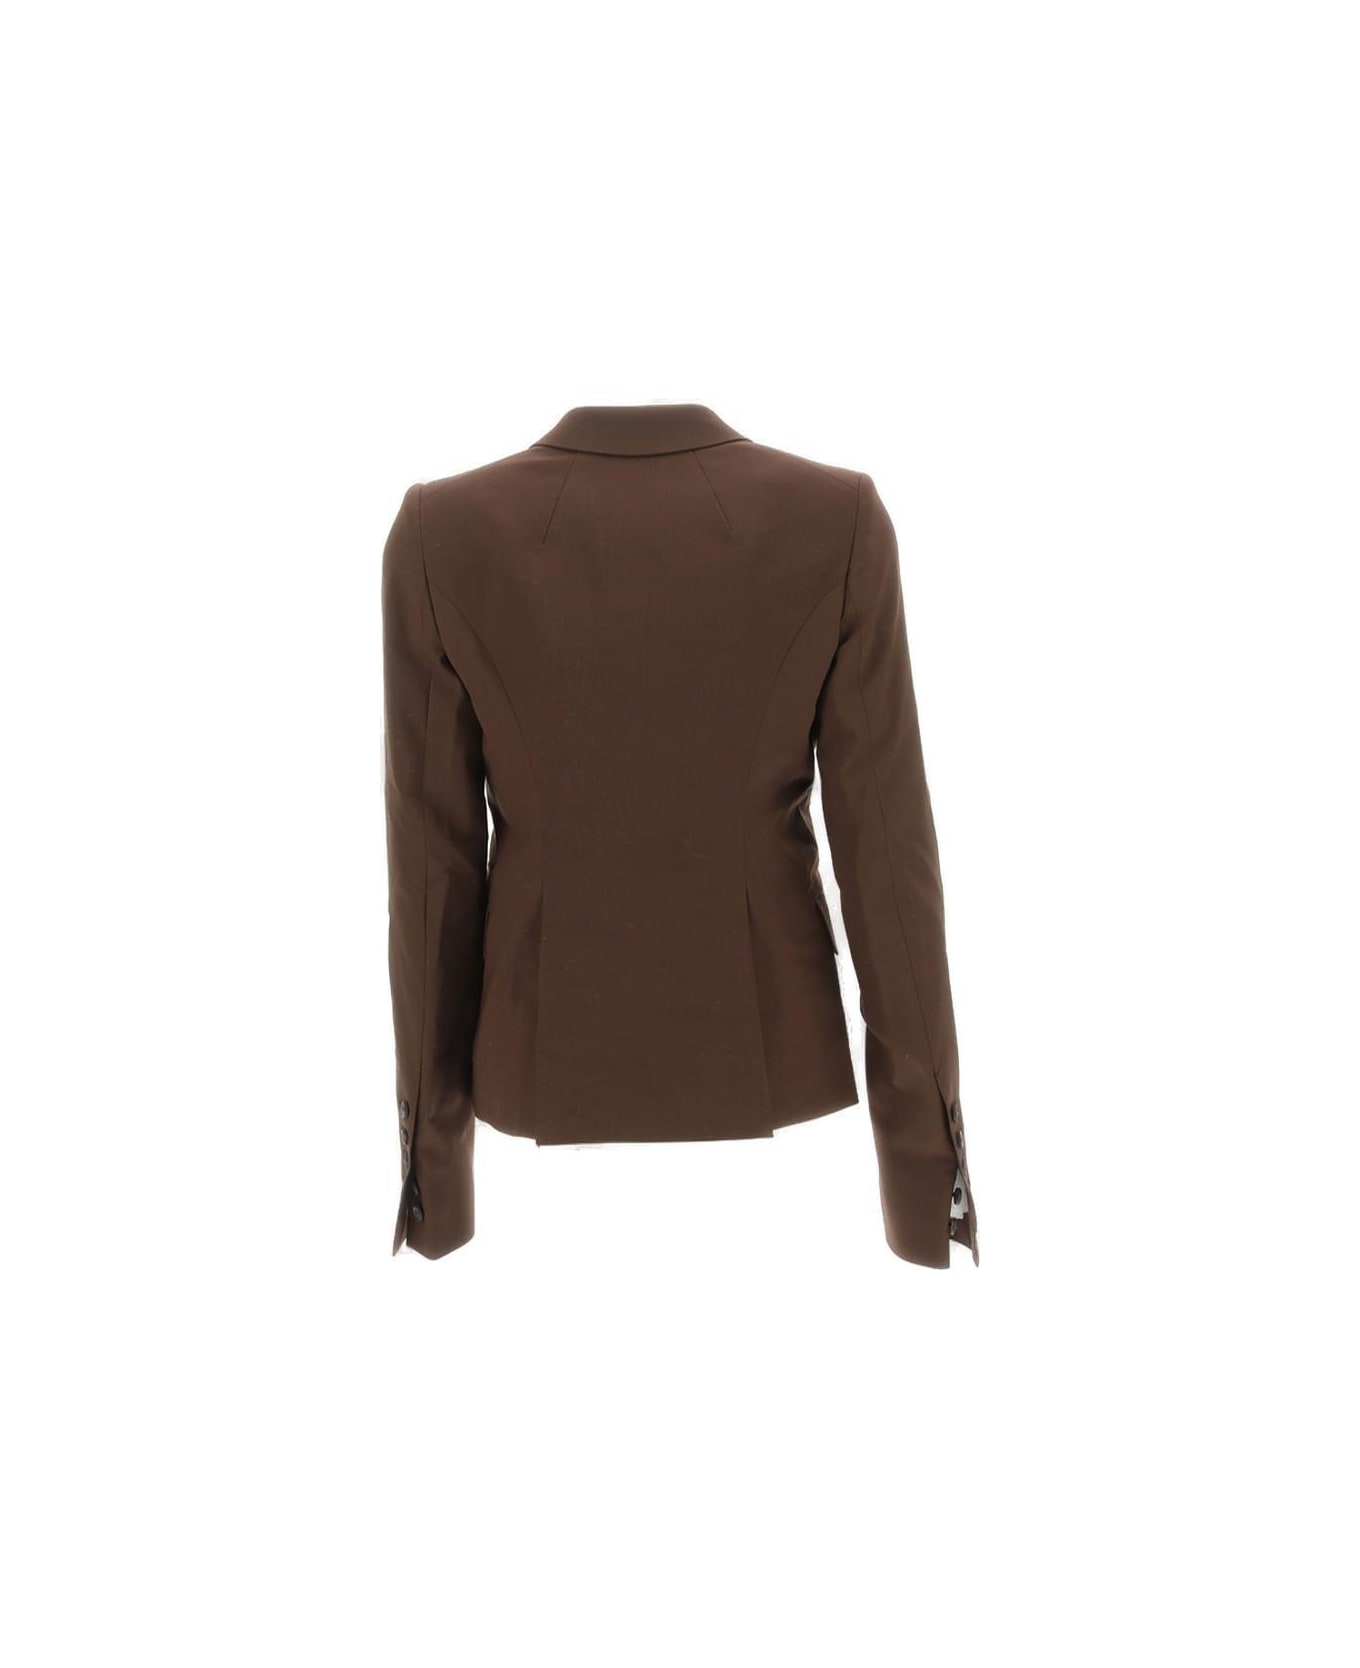 Rick Owens Single-breasted Tailored Blazer - BROWN  